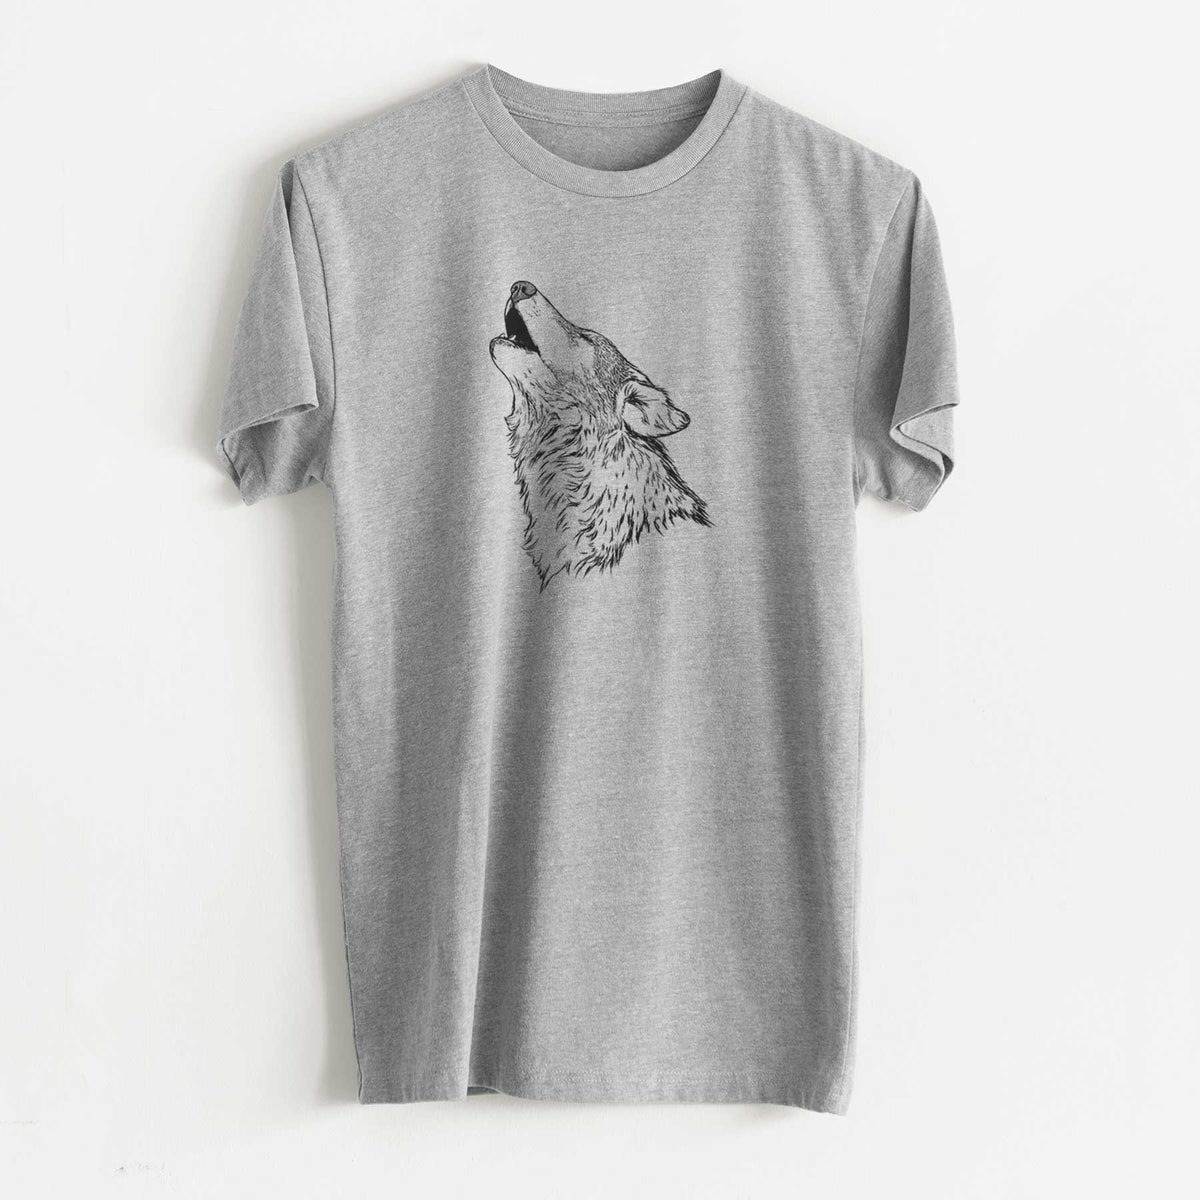 Canis lupus - Grey Wolf Howling - Unisex Recycled Eco Tee  - CLOSEOUT - FINAL SALE